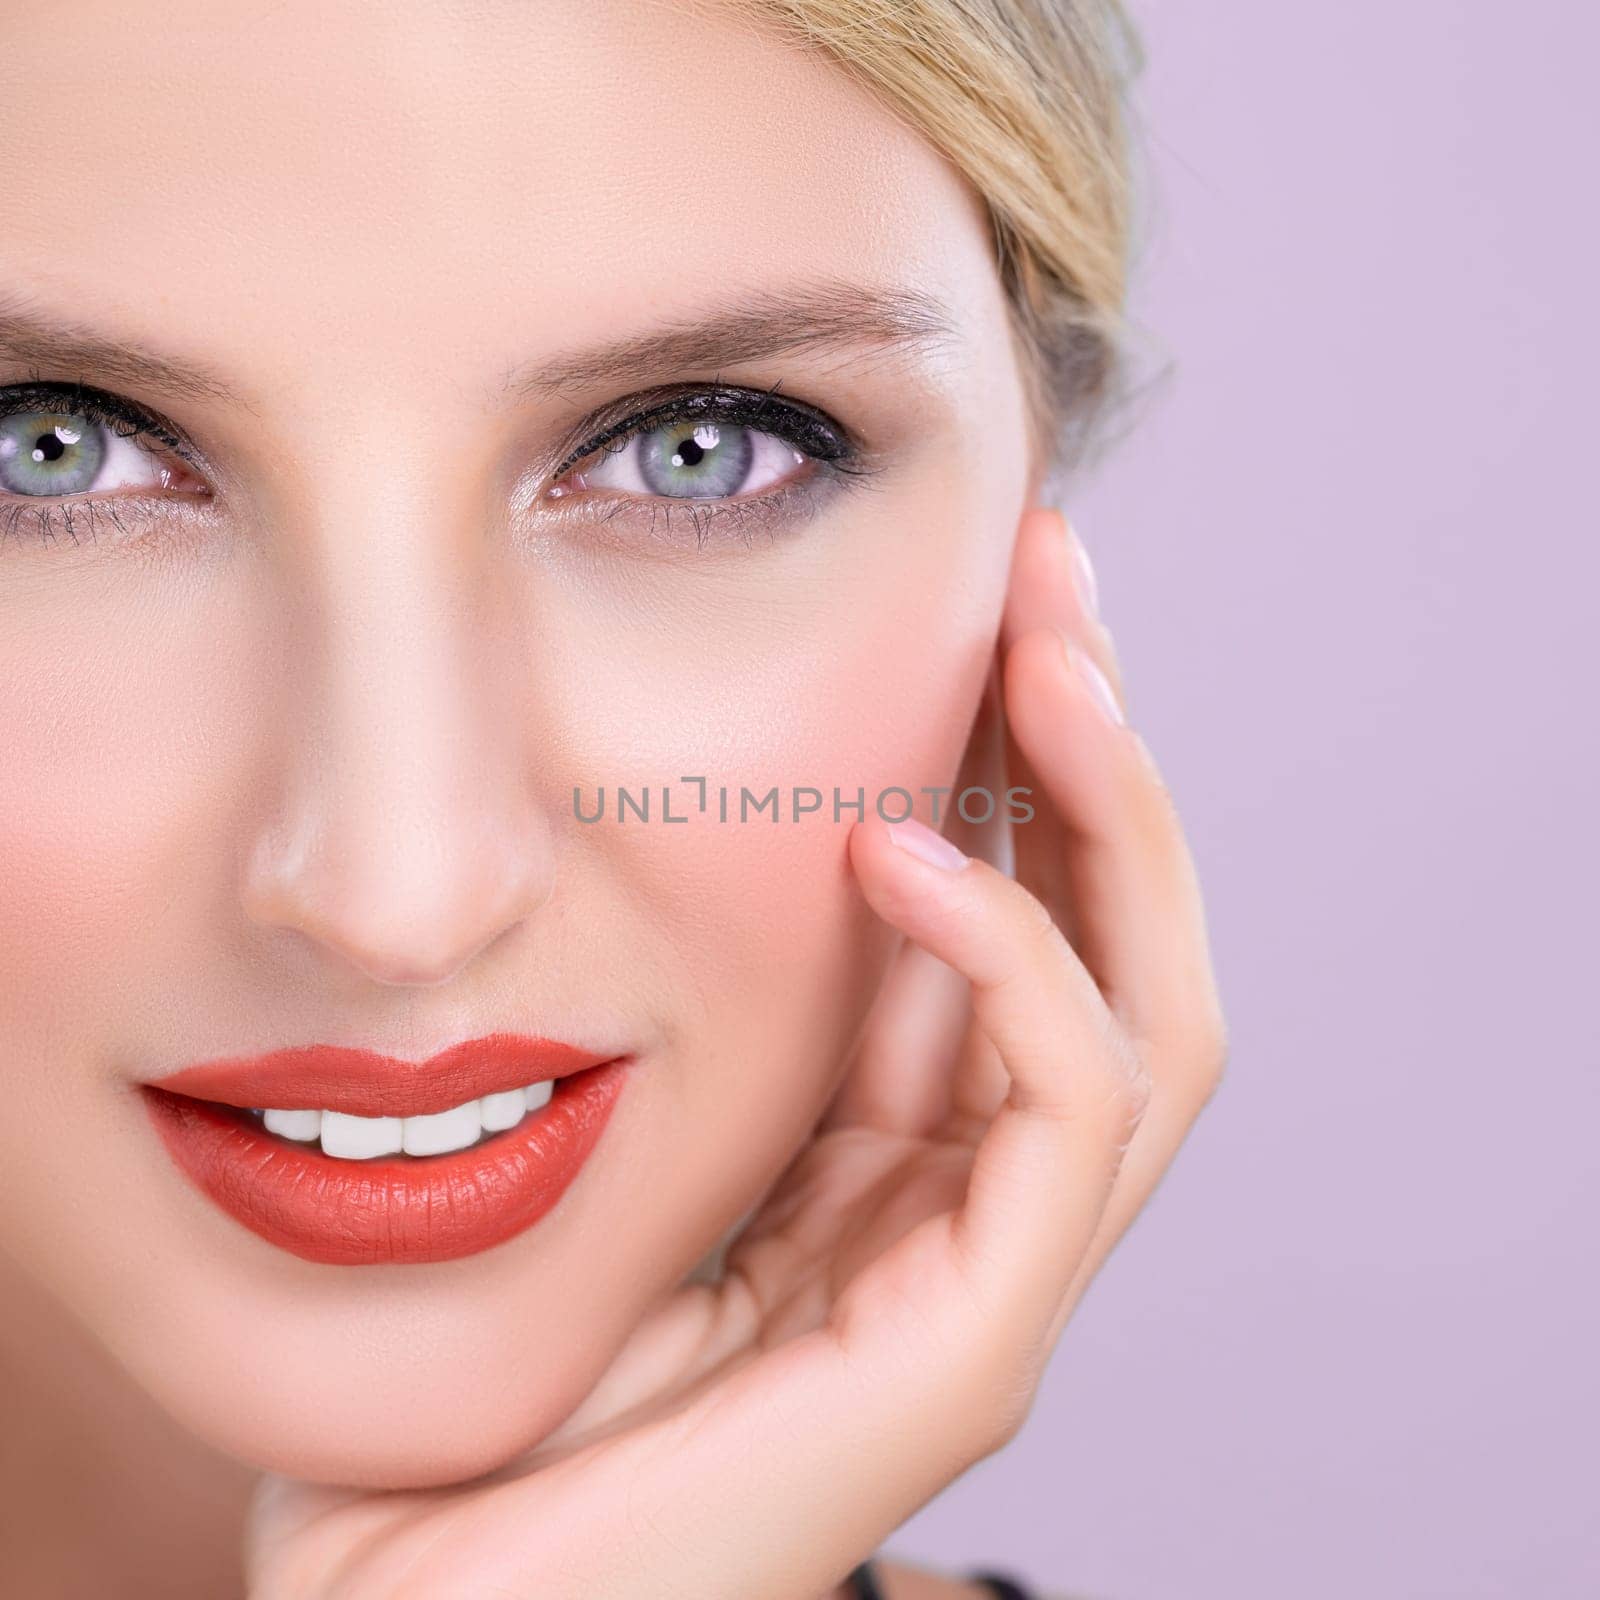 Closeup pretty beautiful woman with alluring perfect smooth and clean skin portrait in pink isolated background. Hand gesture with expressive facial expression for beauty model concept.